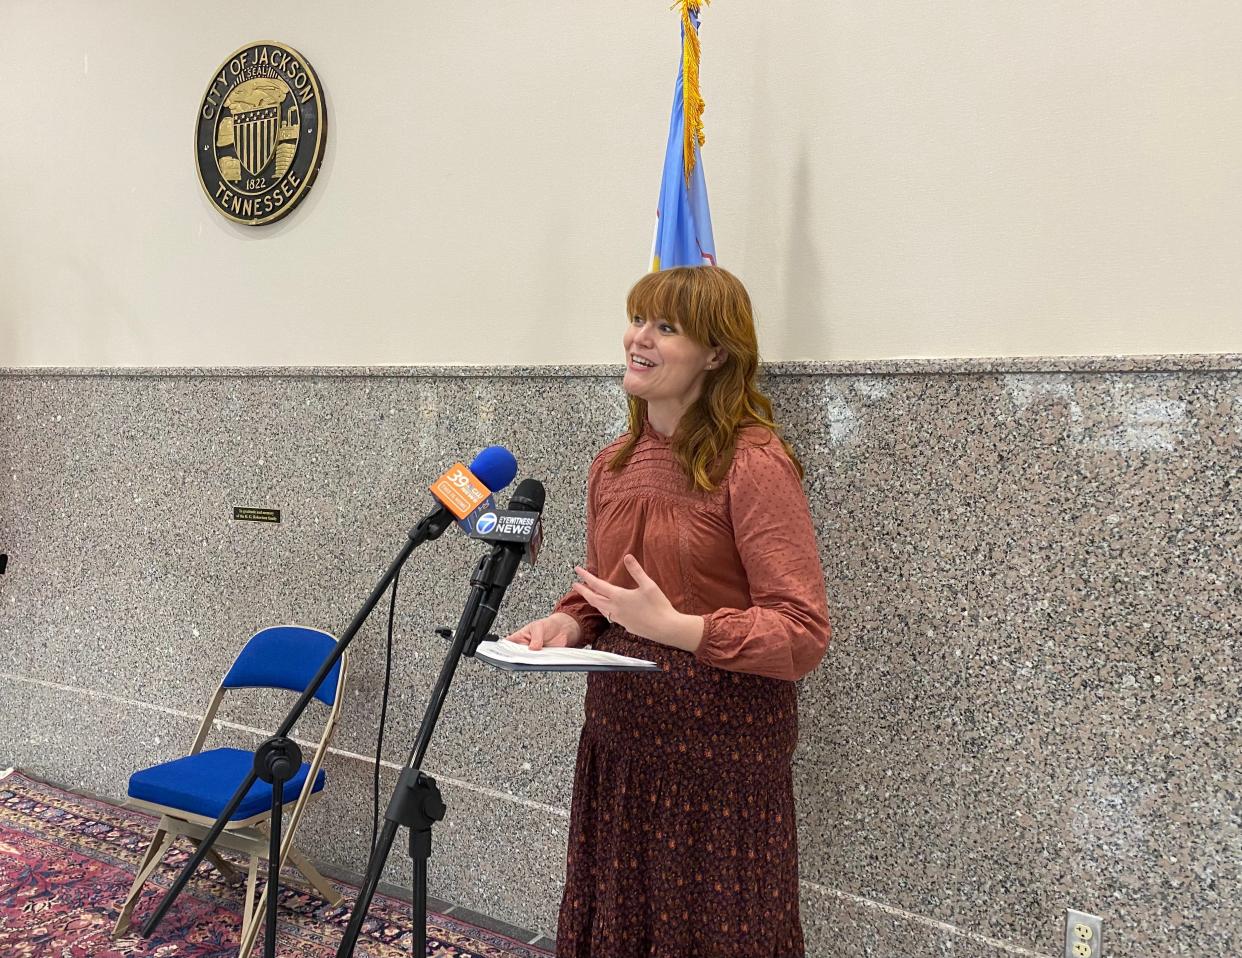 Lizzie Emmons, executive director of the Jackson Arts Council, speaks with reporters to encourage Jackson residents to apply for the flag re-design contest.